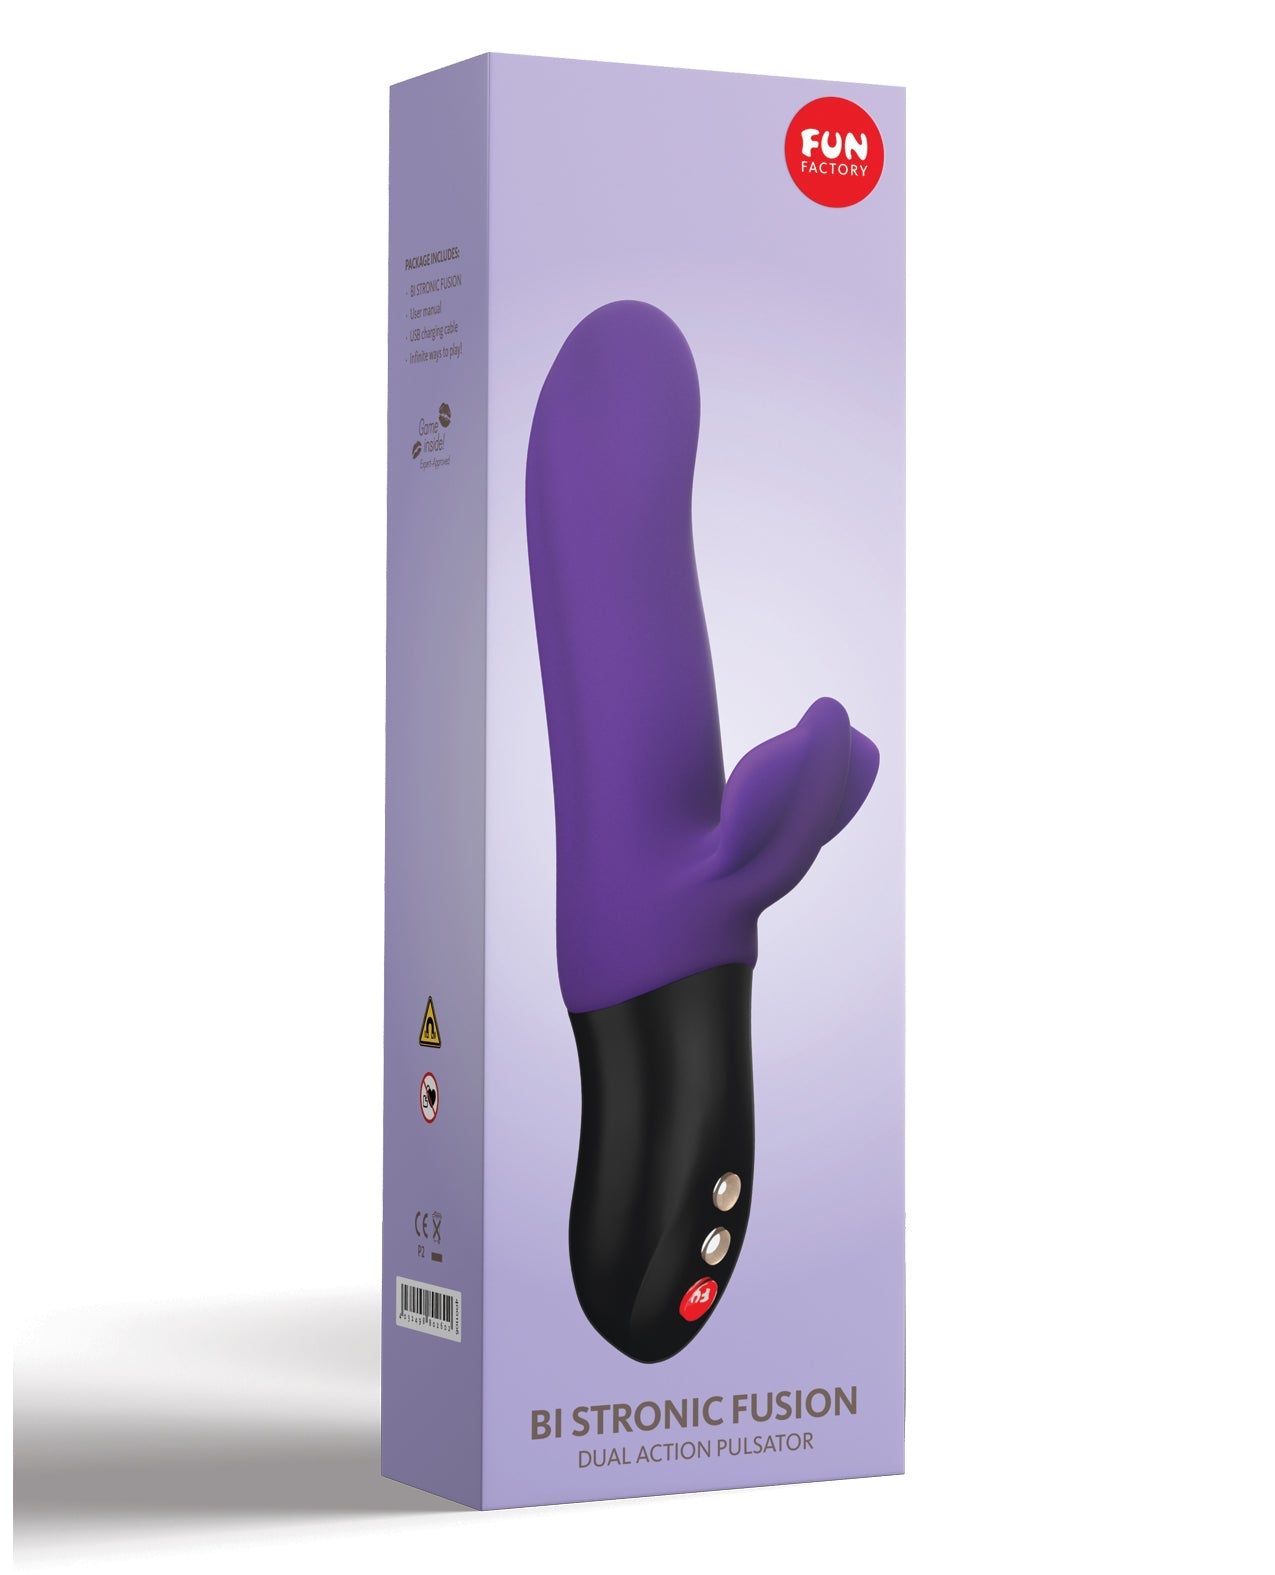 Fun Factory Bi Stronic Fusion Back and Forth Vibration - Violet